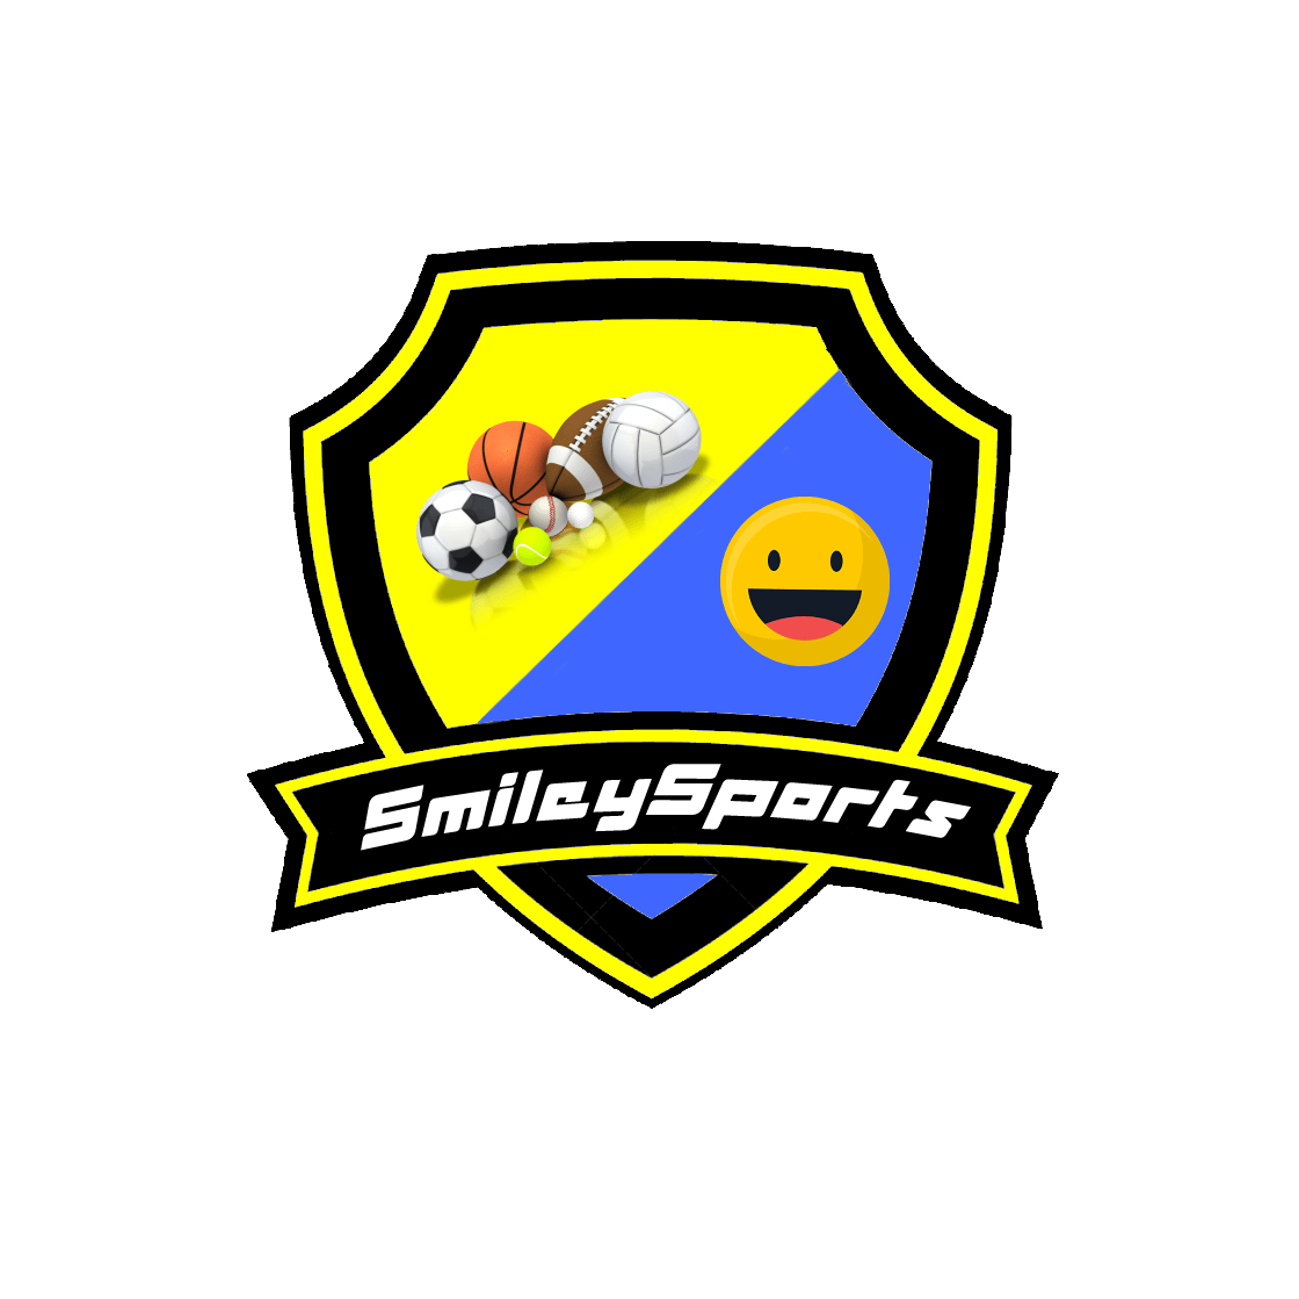 Smiley Sports is Capabel